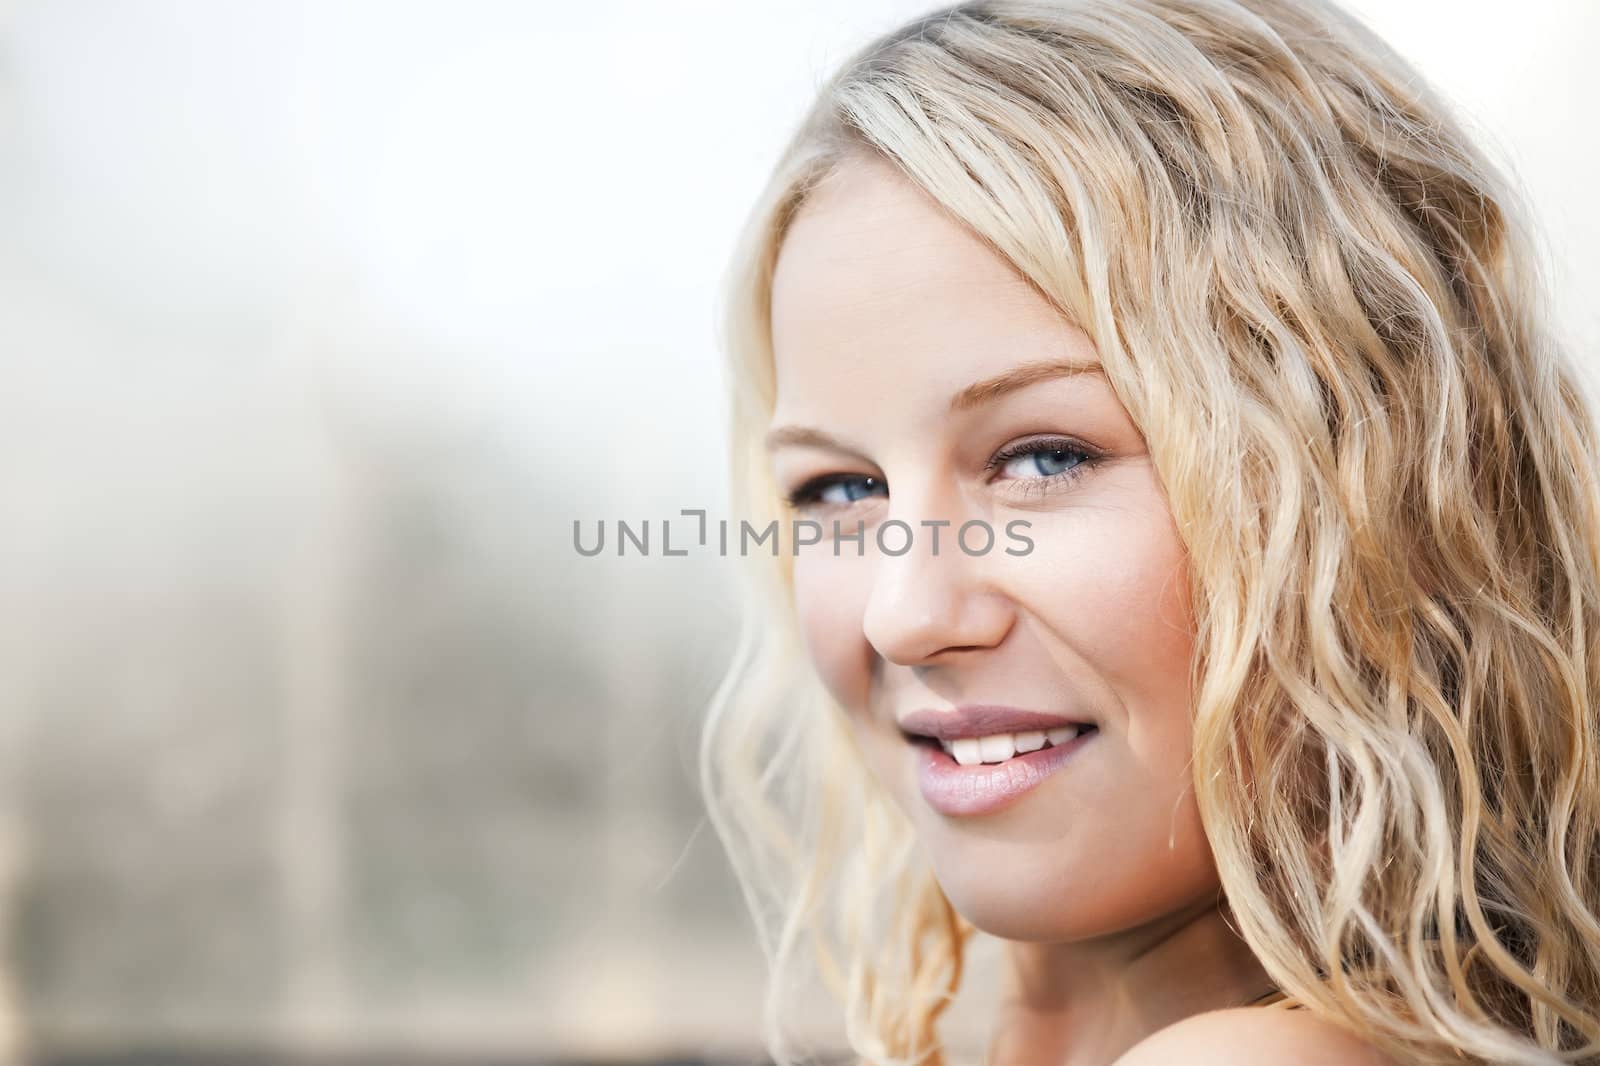 An image of a beautiful blonde woman portrait